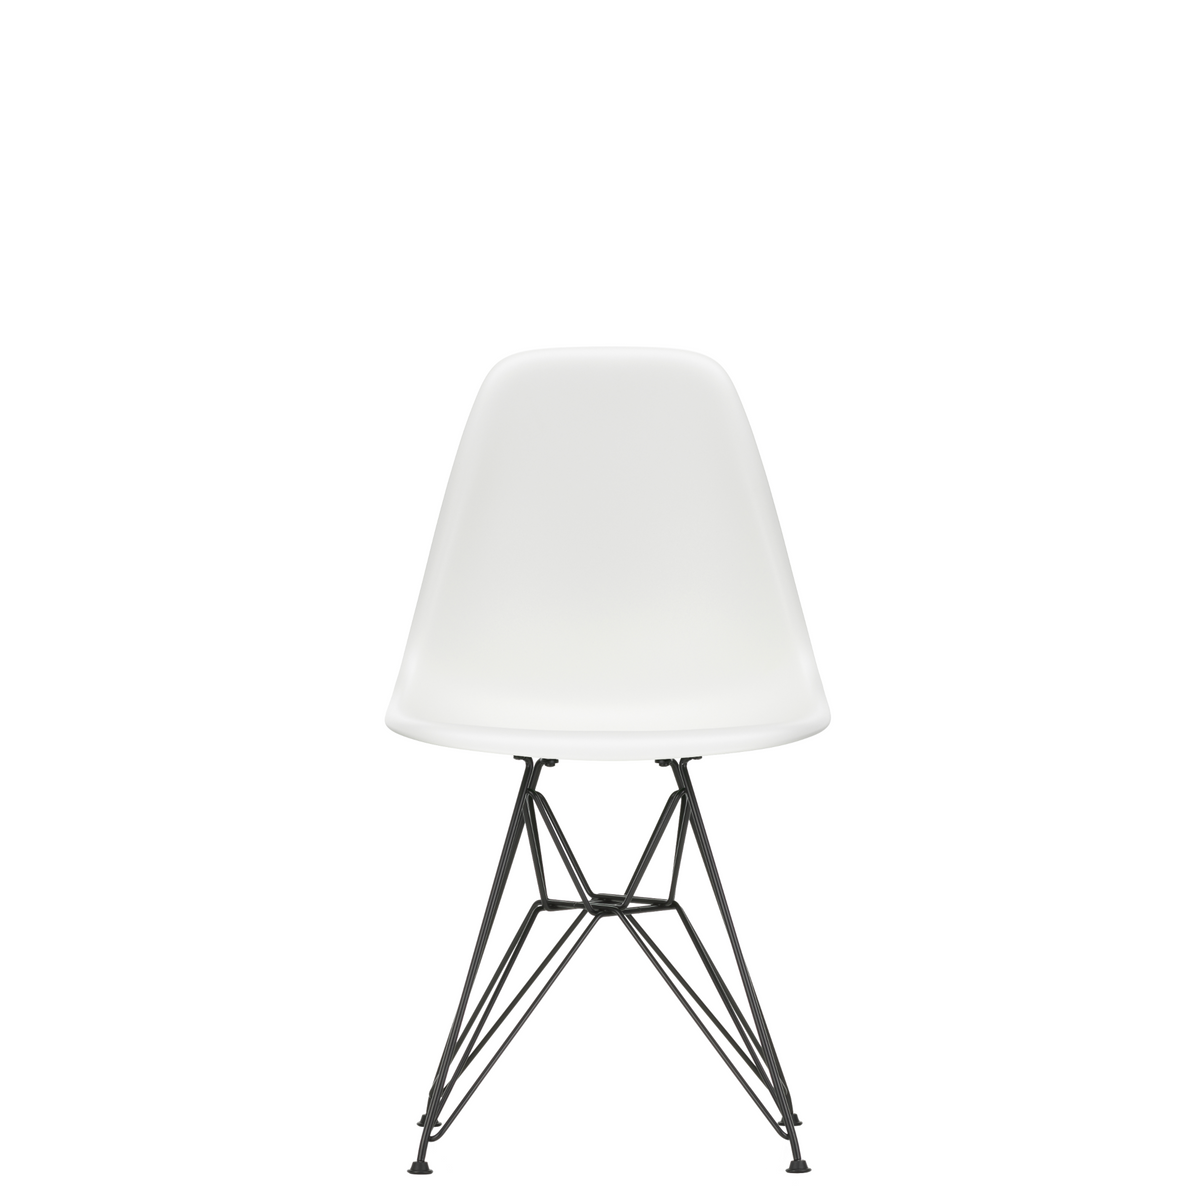 Vitra Eames Plastic Side Chair DSR Powder Coated for Outdoor Use White Shell Black Powdercoated Base